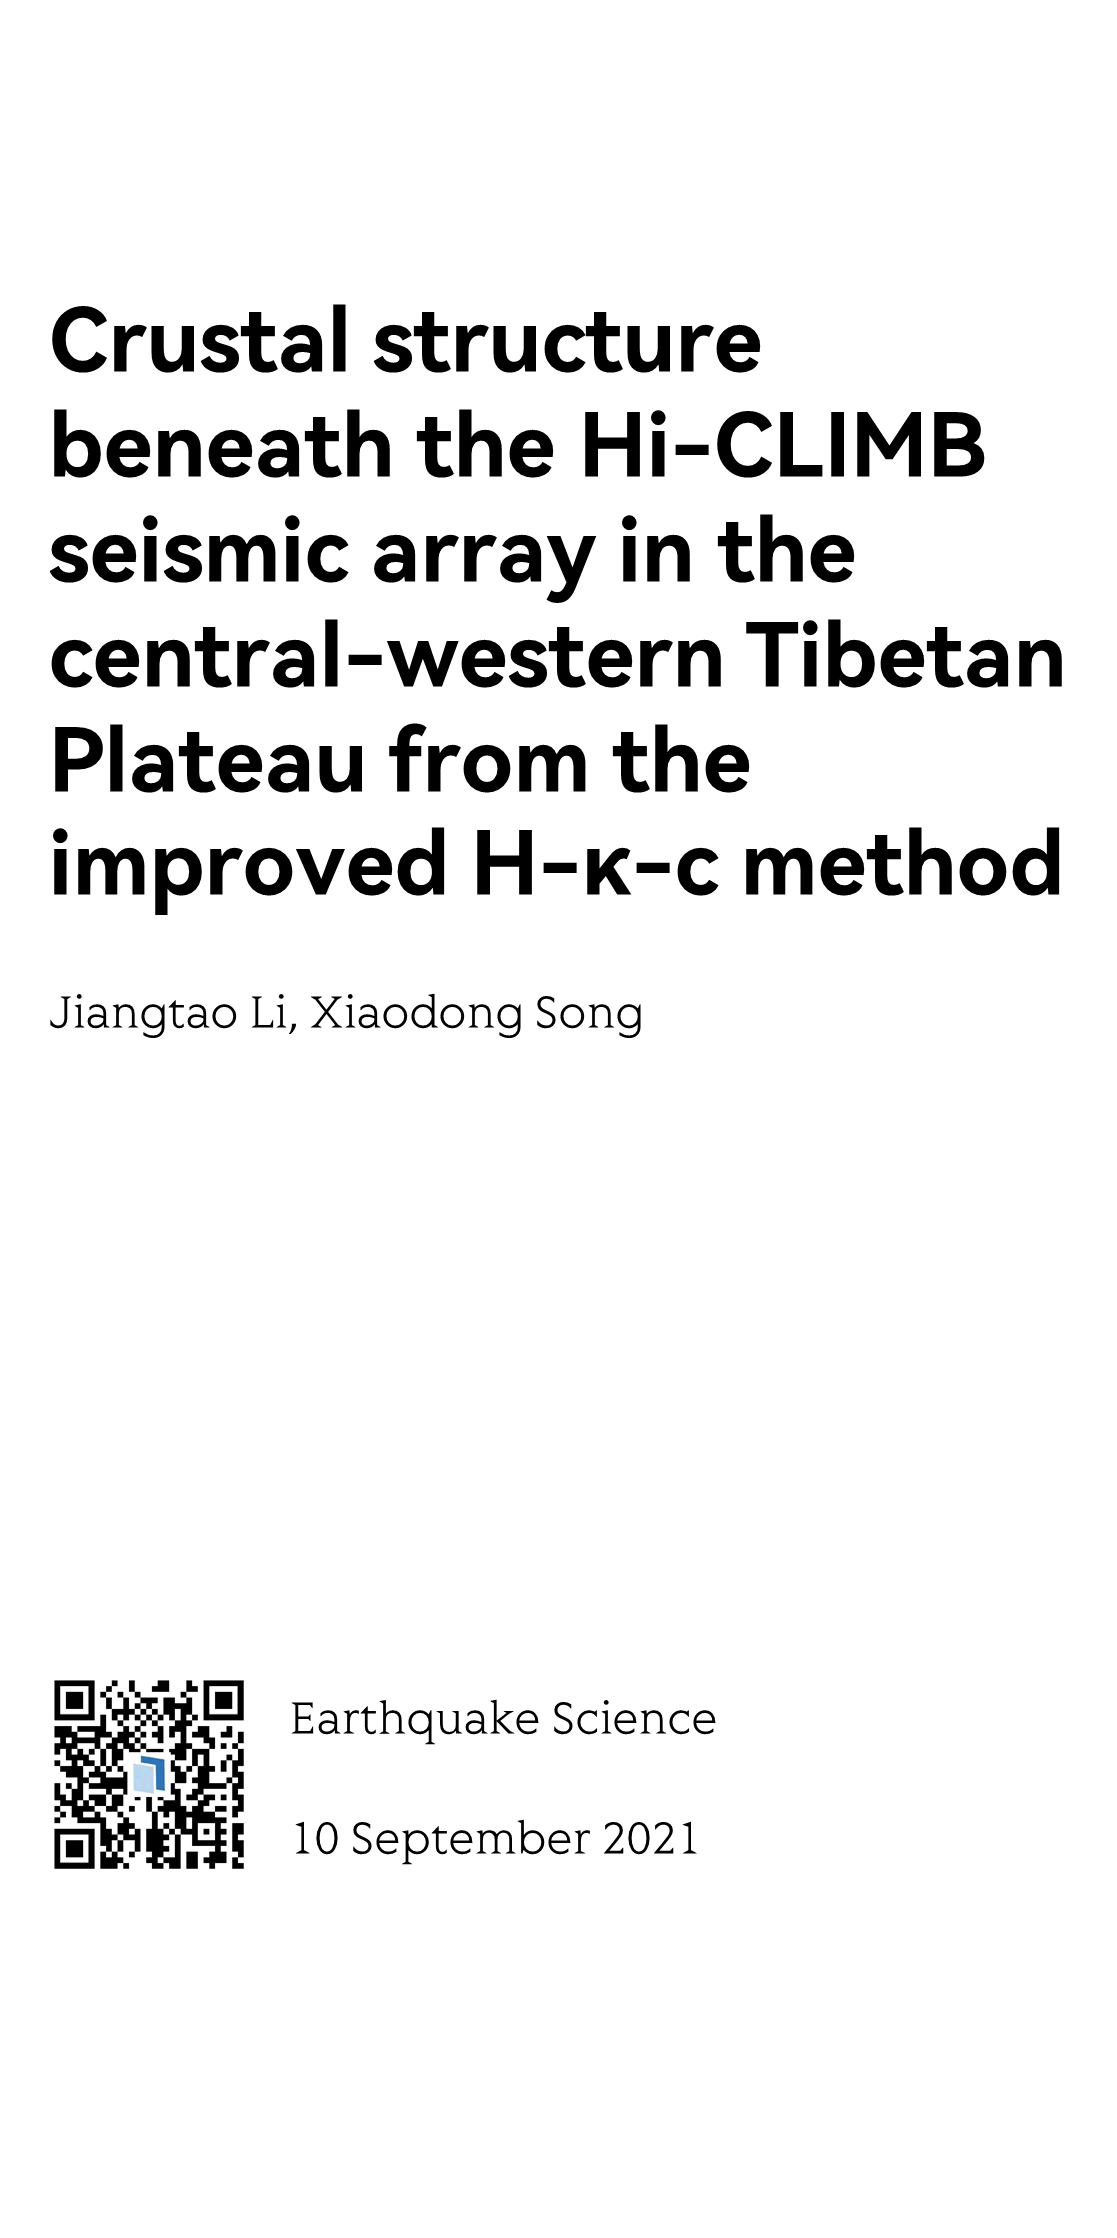 Crustal structure beneath the Hi-CLIMB seismic array in the central-western Tibetan Plateau from the improved H-κ-c method_1